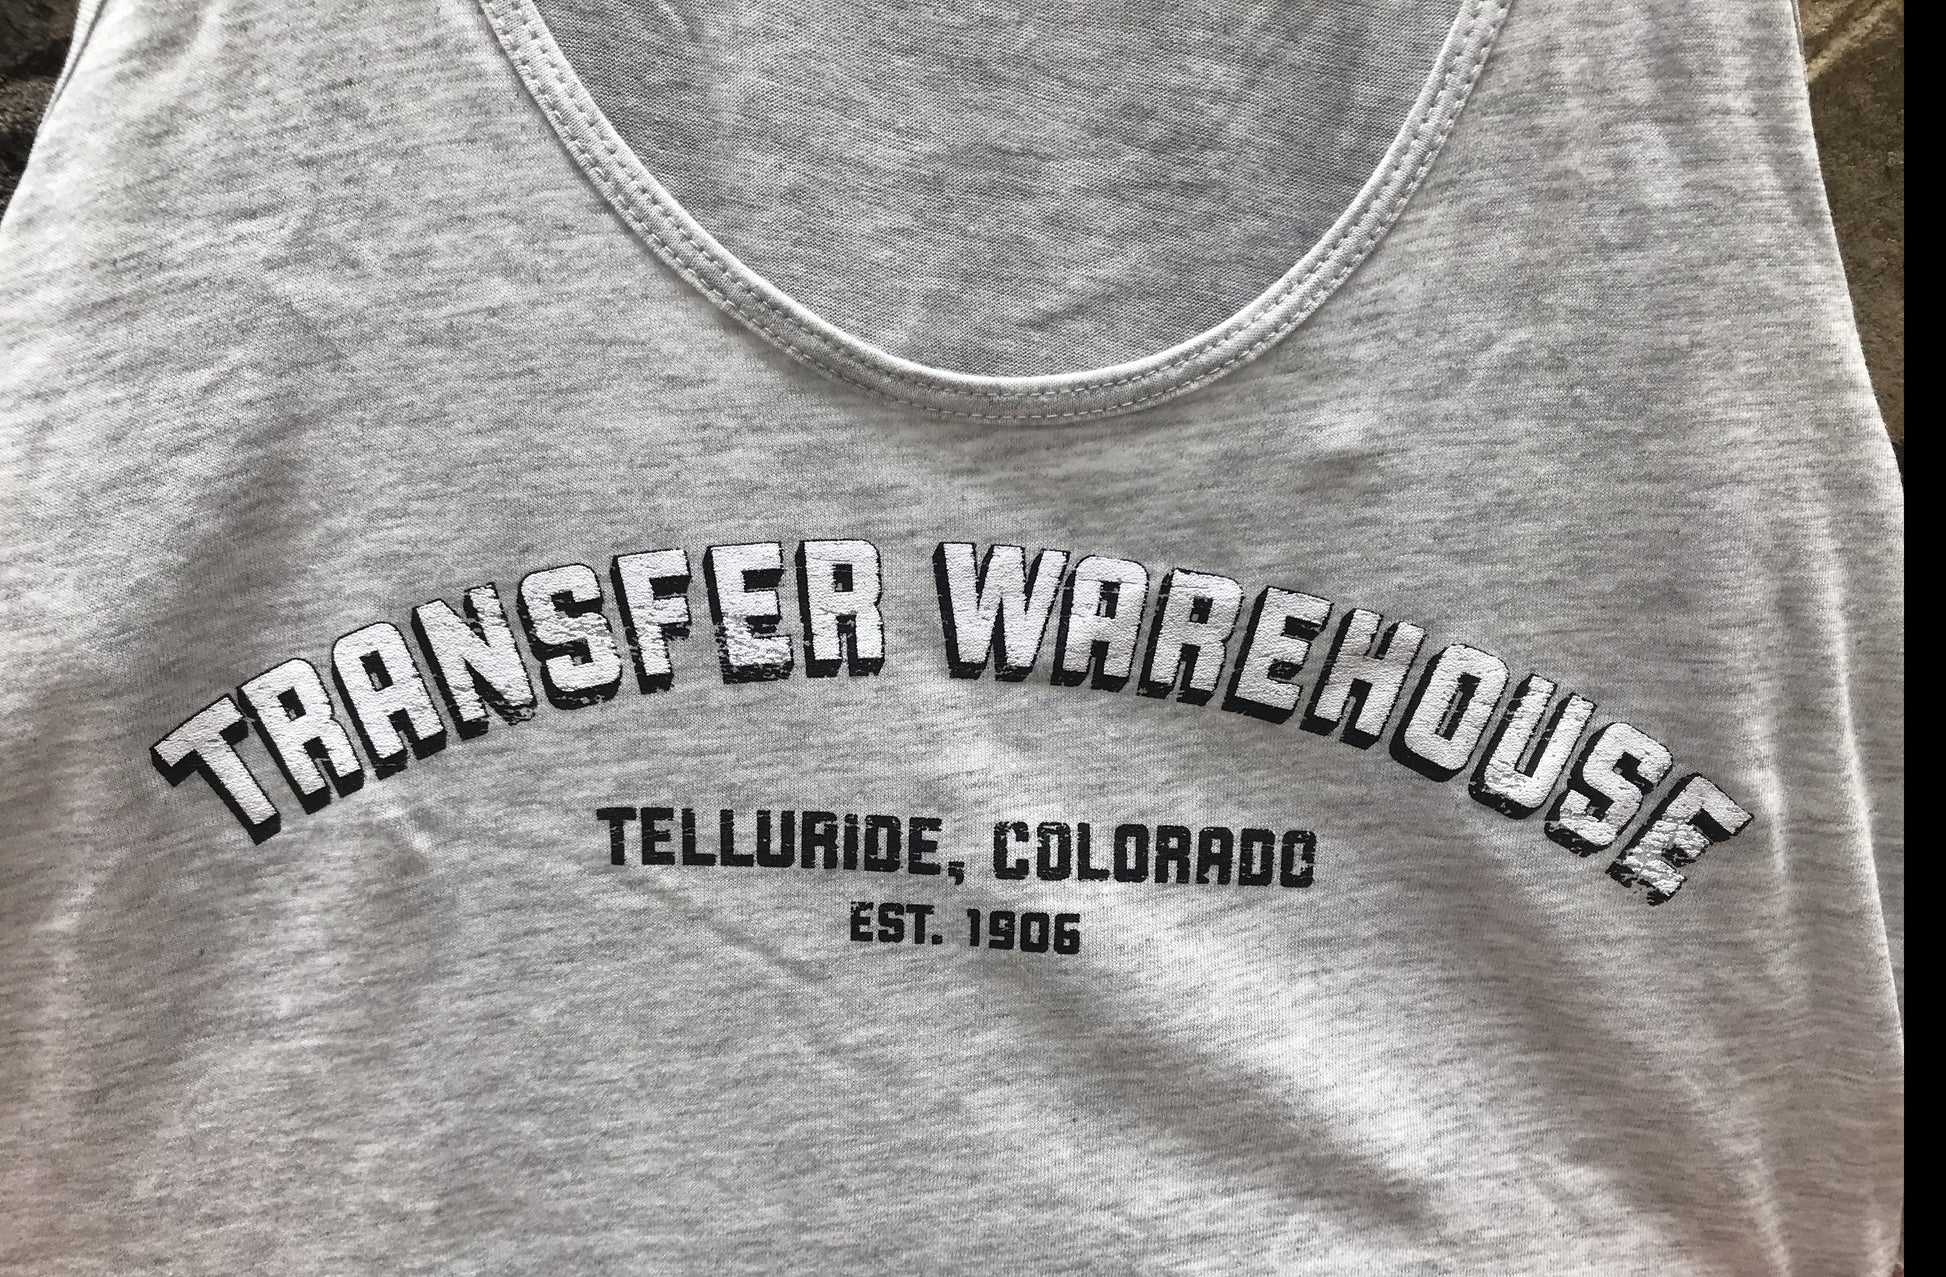 Light Grey tank top with the words "Transfer Warehouse. Telluride, Colorado. Est. 1906." Close up on words and fabric details.